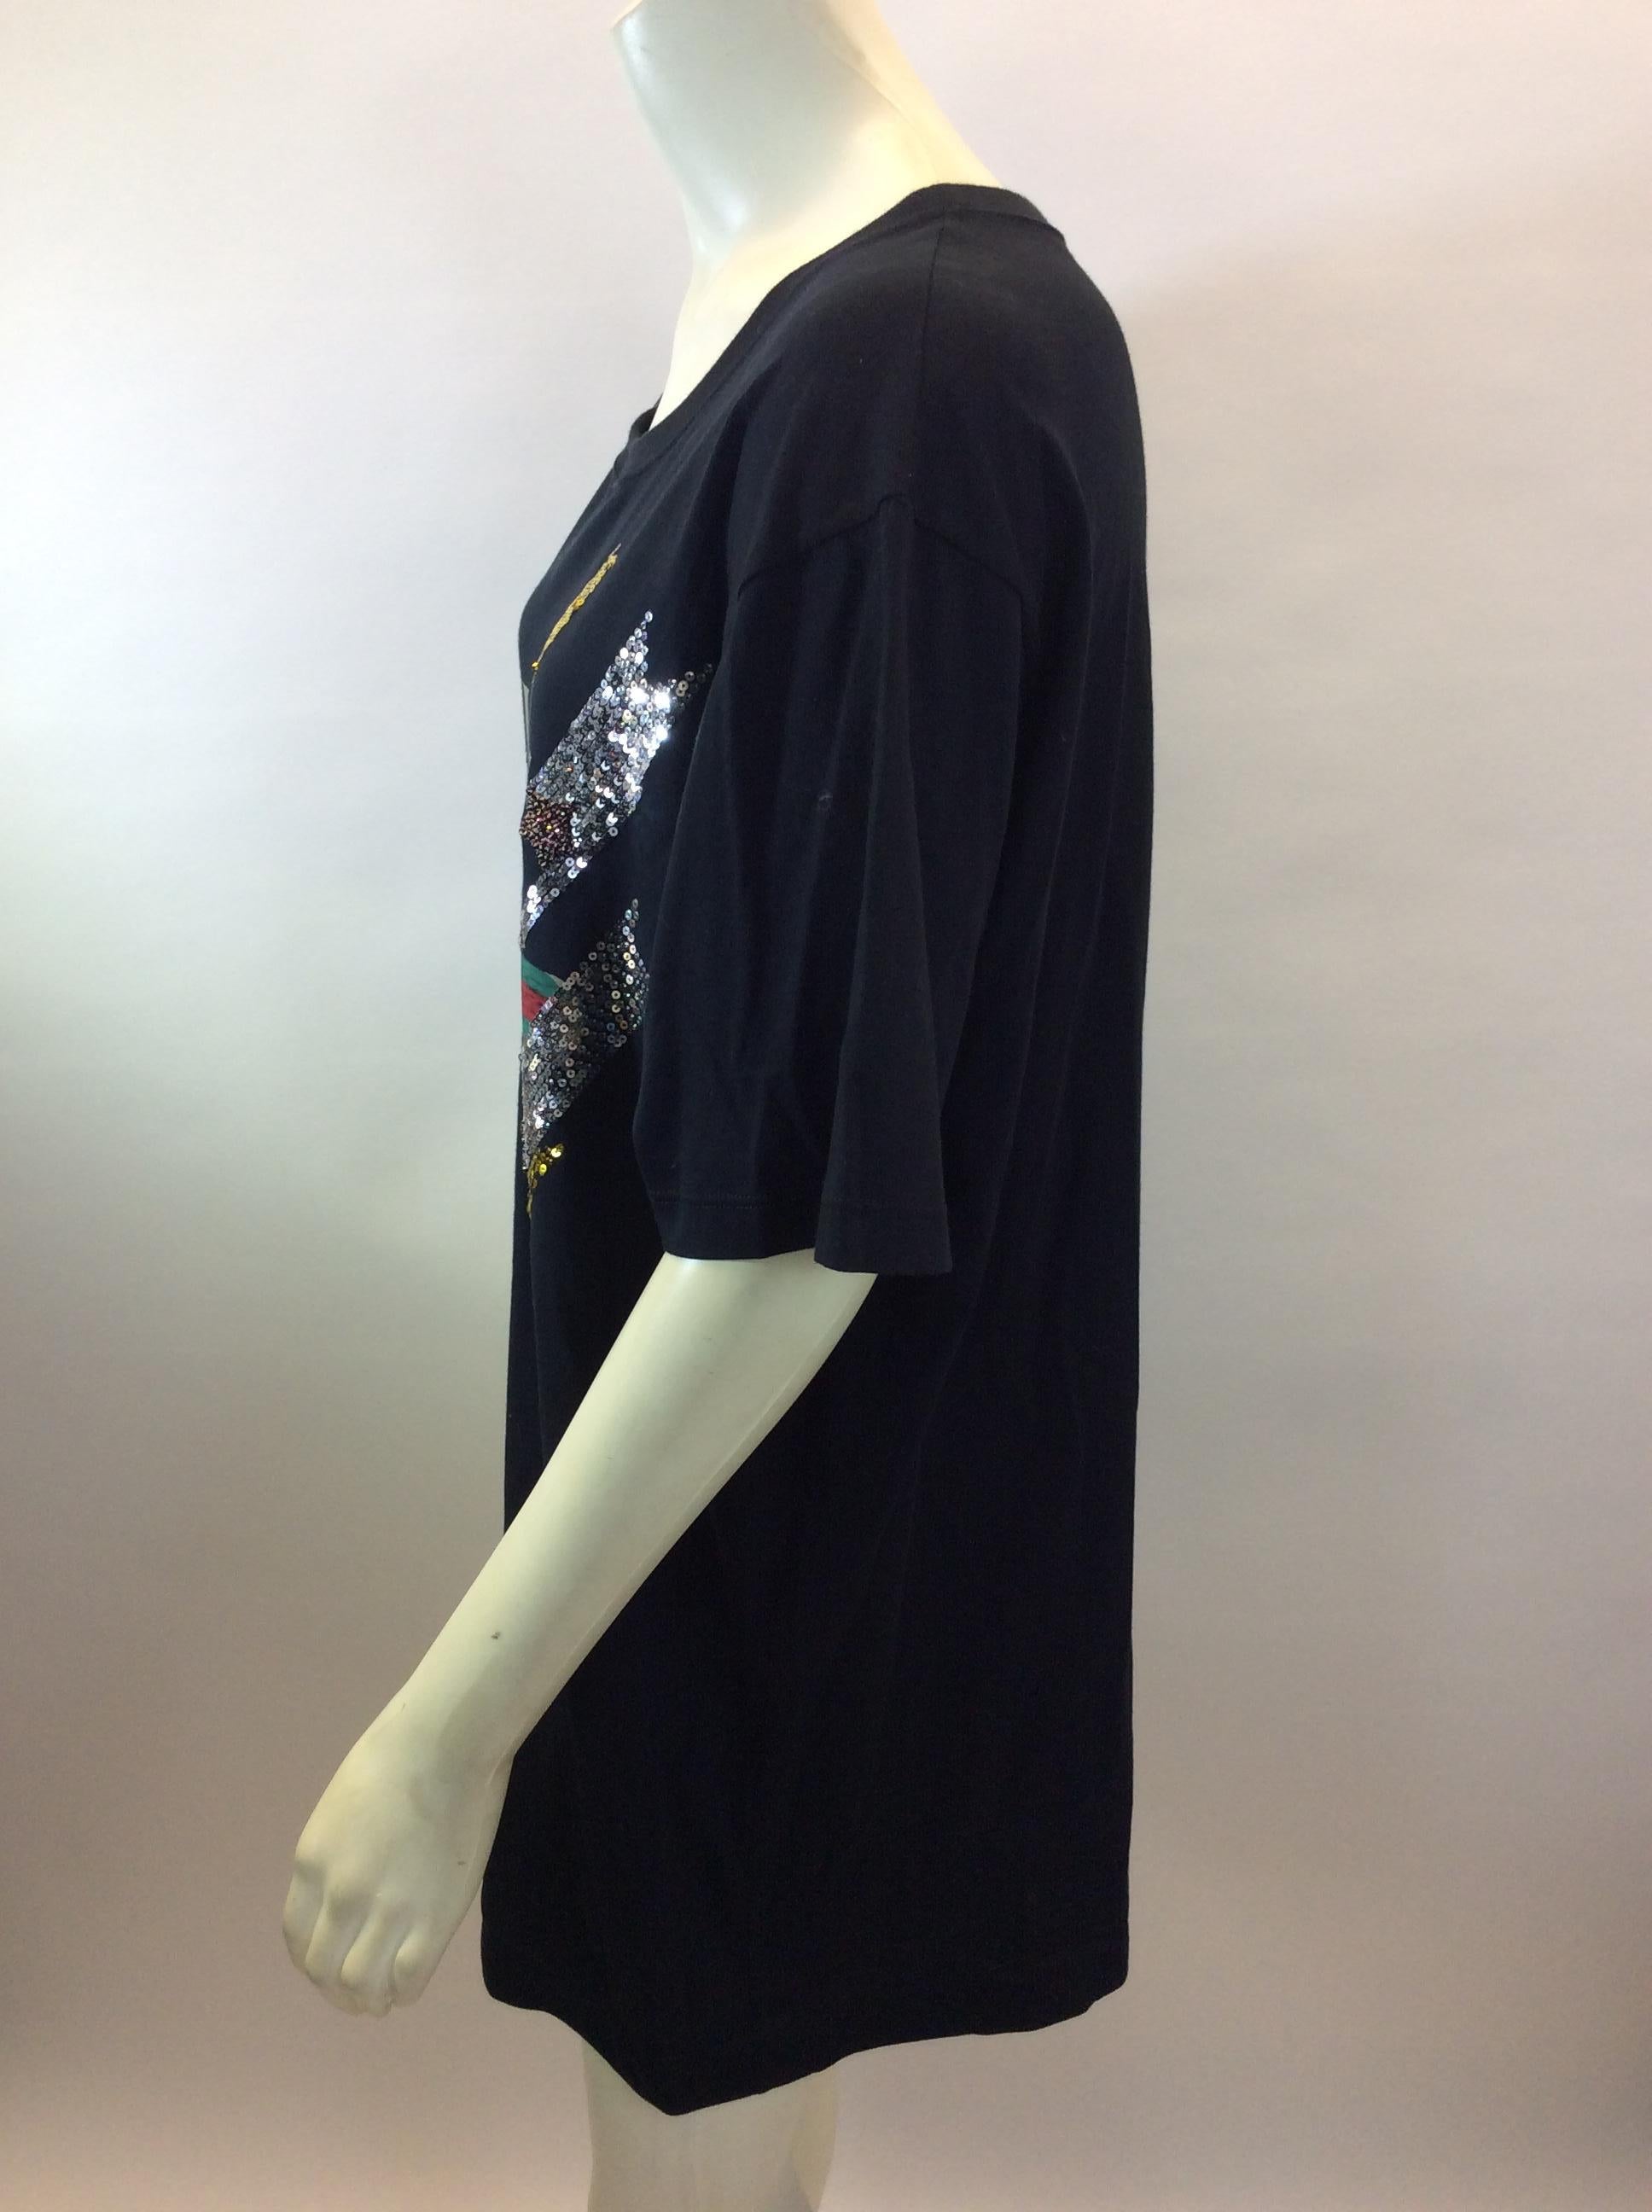 Gucci Black Classic Stripe T-Shirt with Sequin
$950
Made in Italy
100% Cotton
Size Medium
Length 30